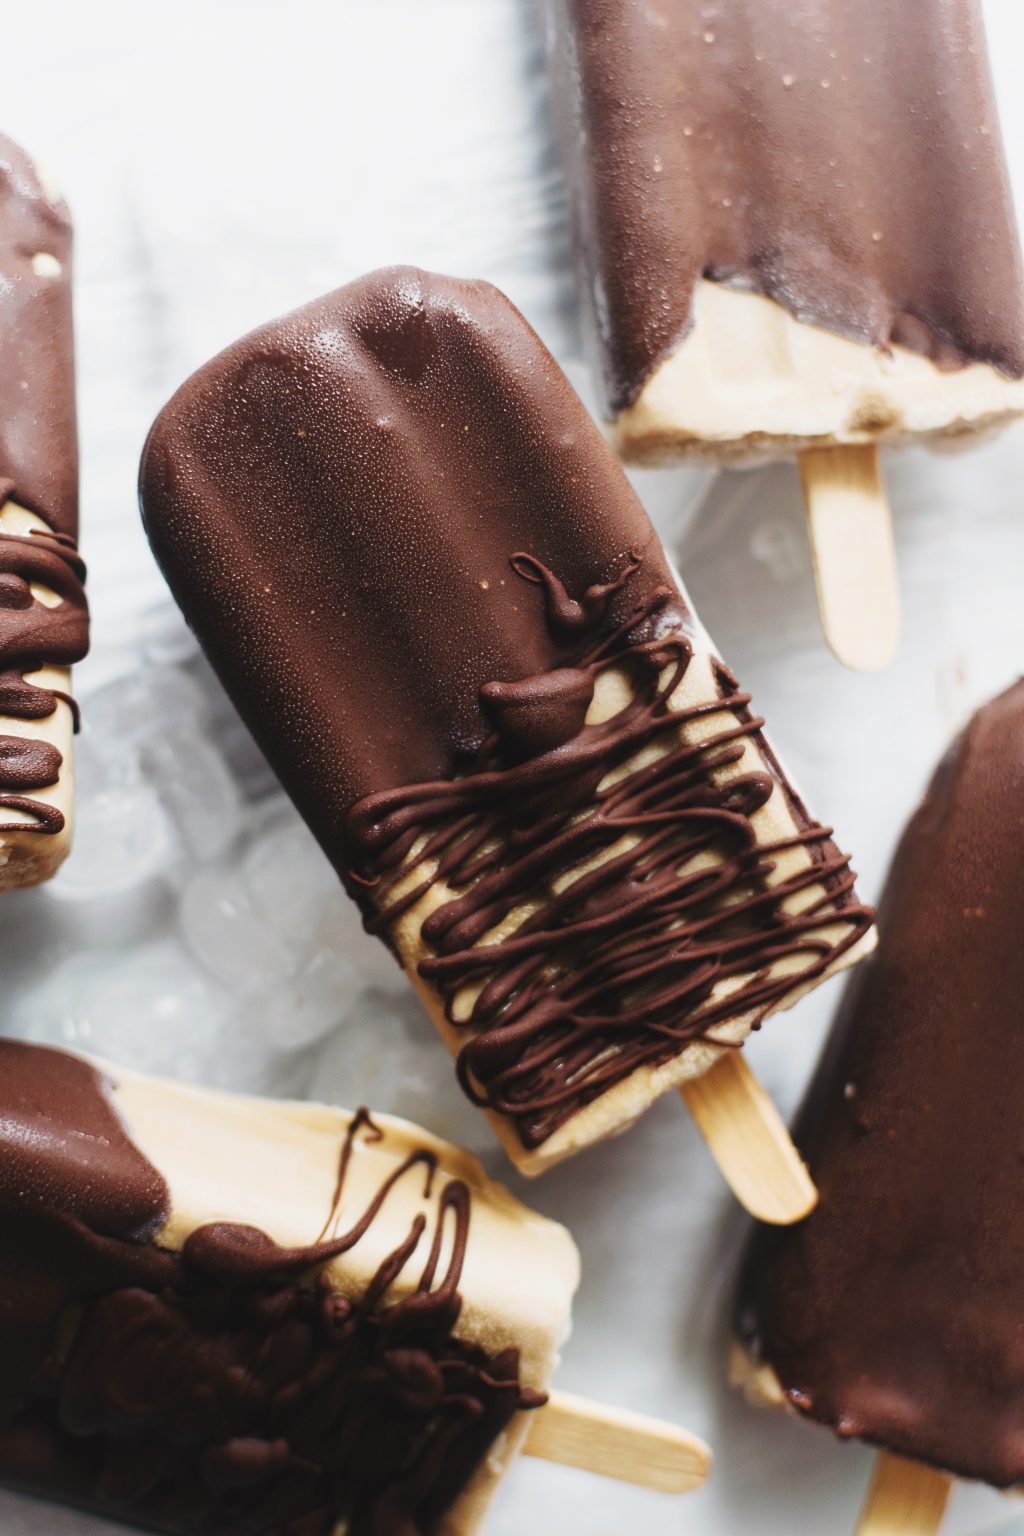 Coffee Popsicle with a Chocolate Shell (Coffee bars)